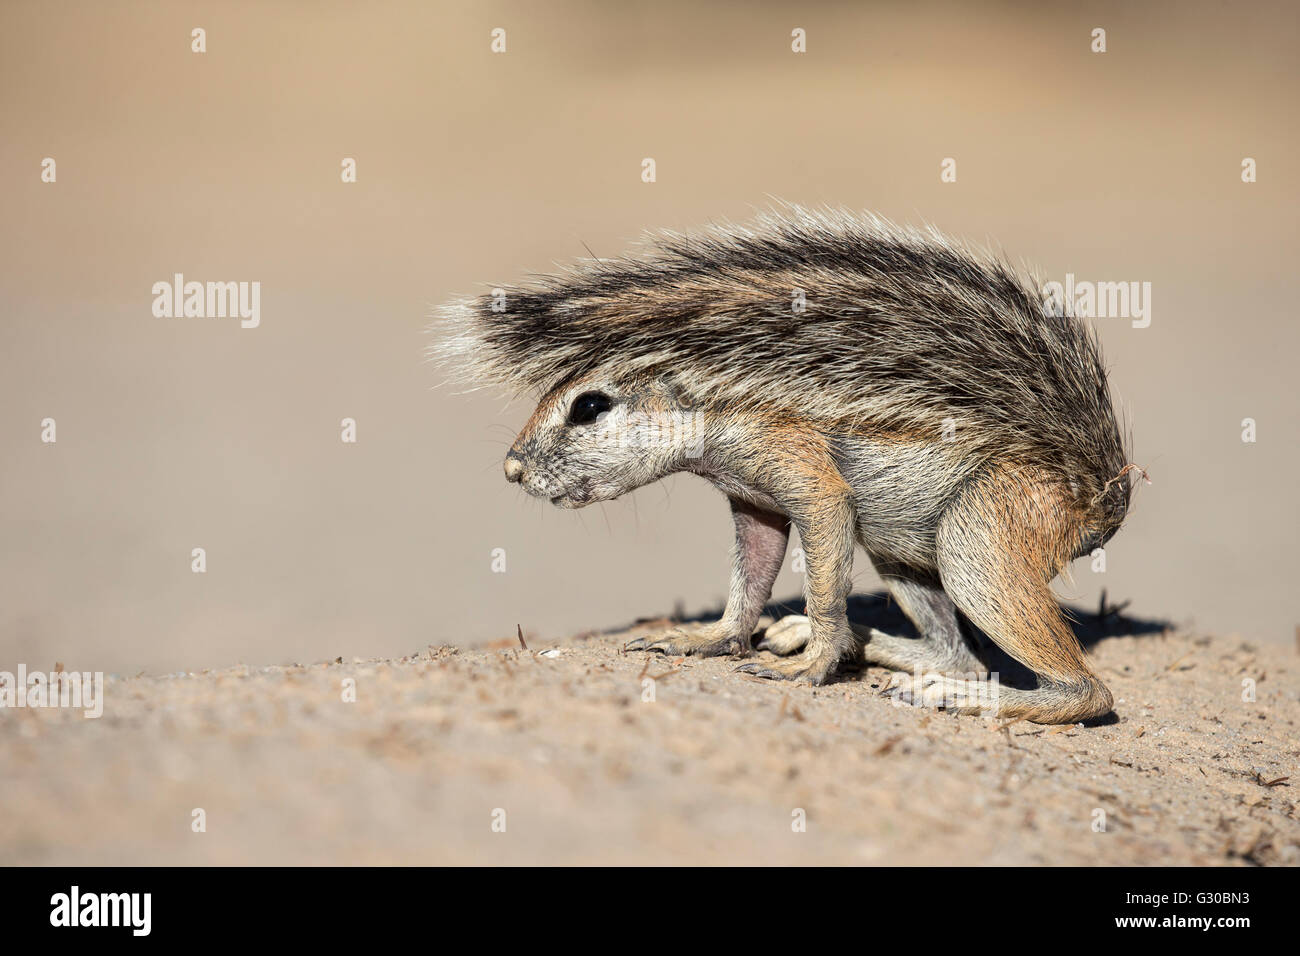 Ground squirrel (Xerus inauris) young, Kgalagadi Transfrontier Park, Northern Cape, South Africa, Africa Stock Photo